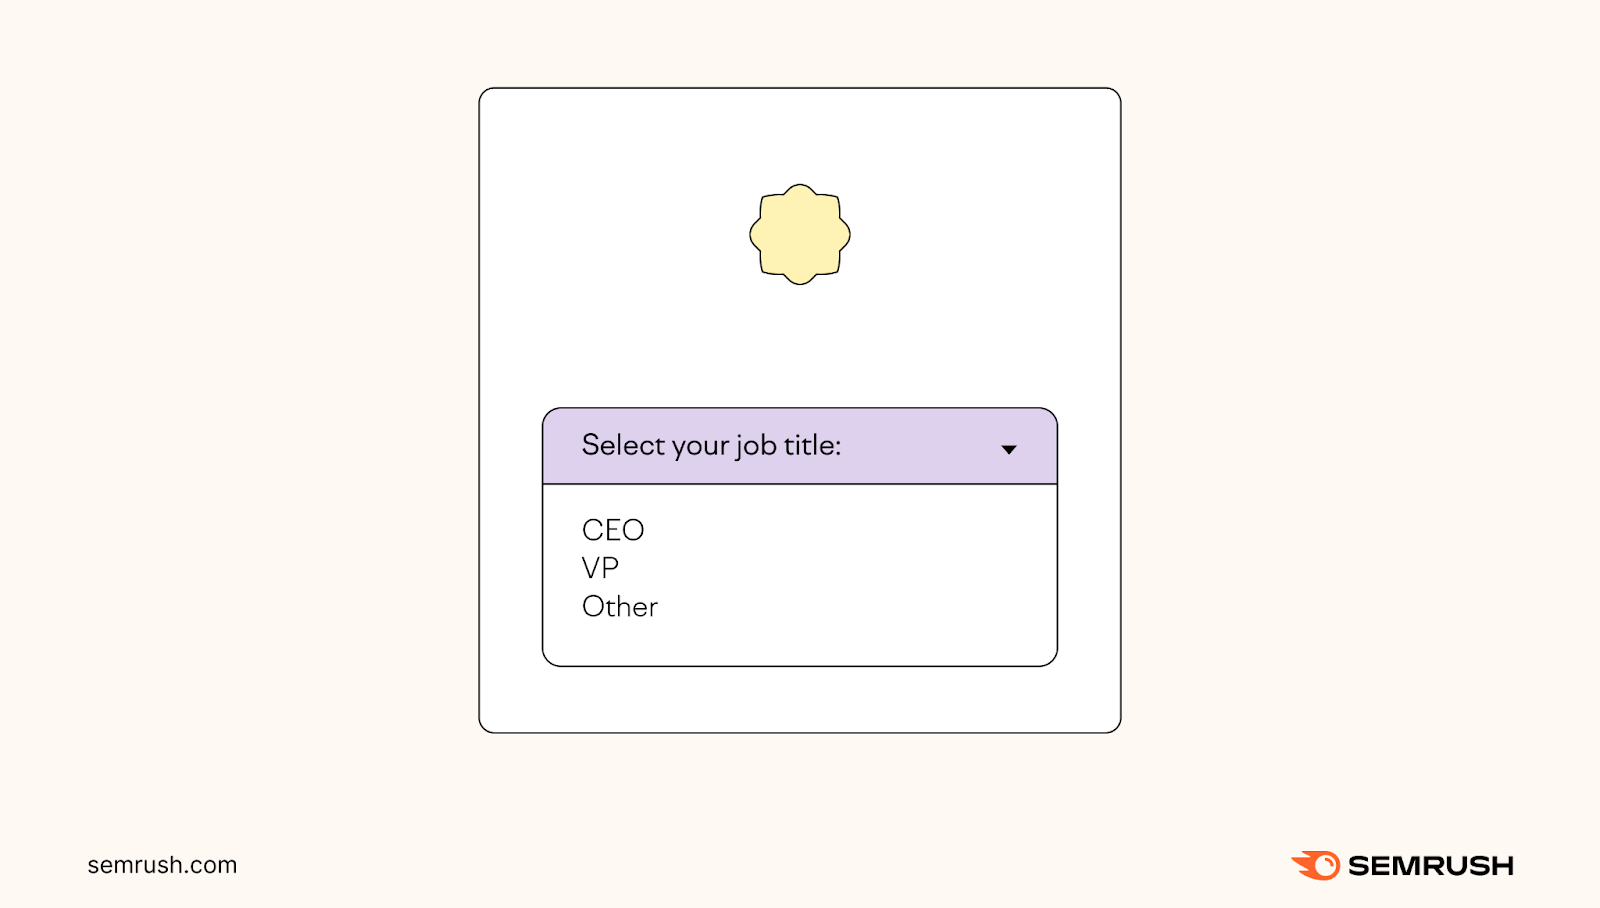 A simple opt-in for, with "Select your job title" field